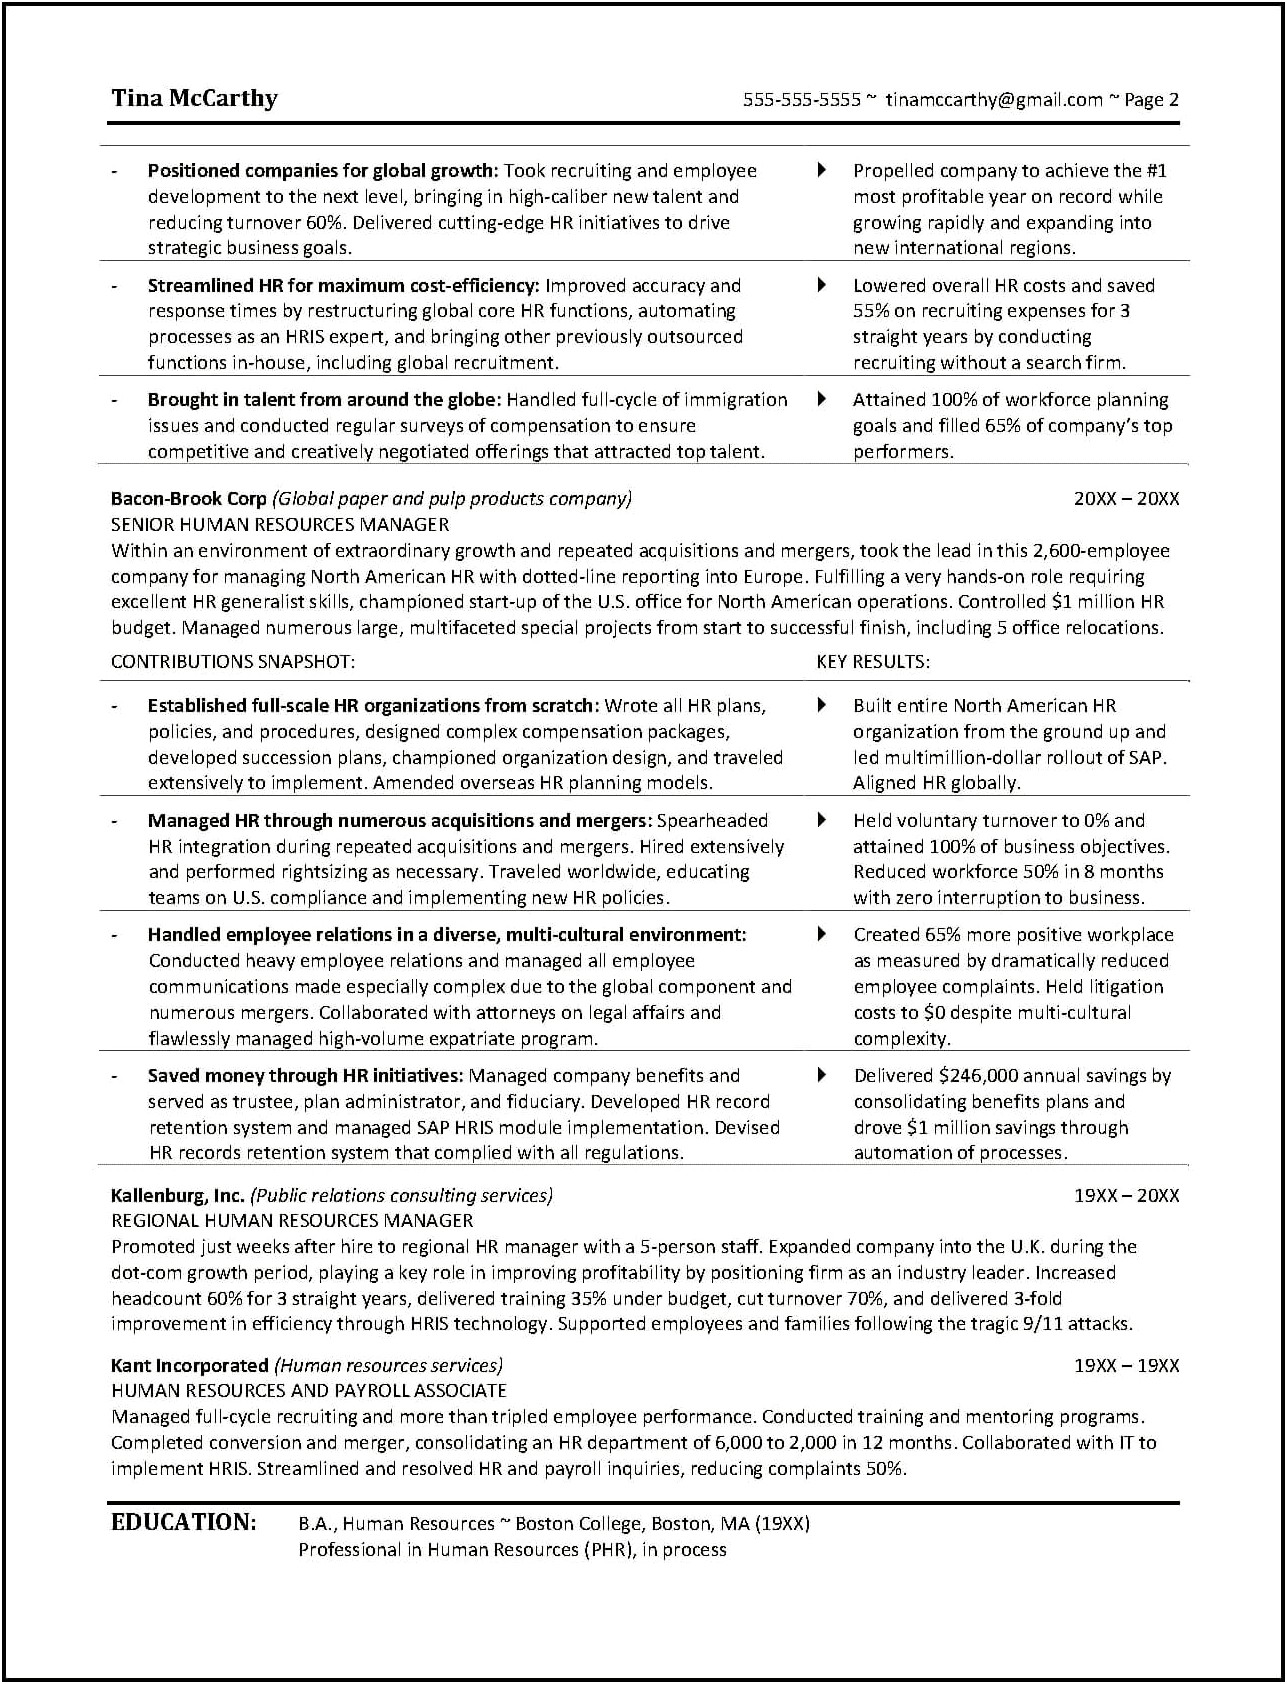 Resume Summary Statement Examples Human Resources